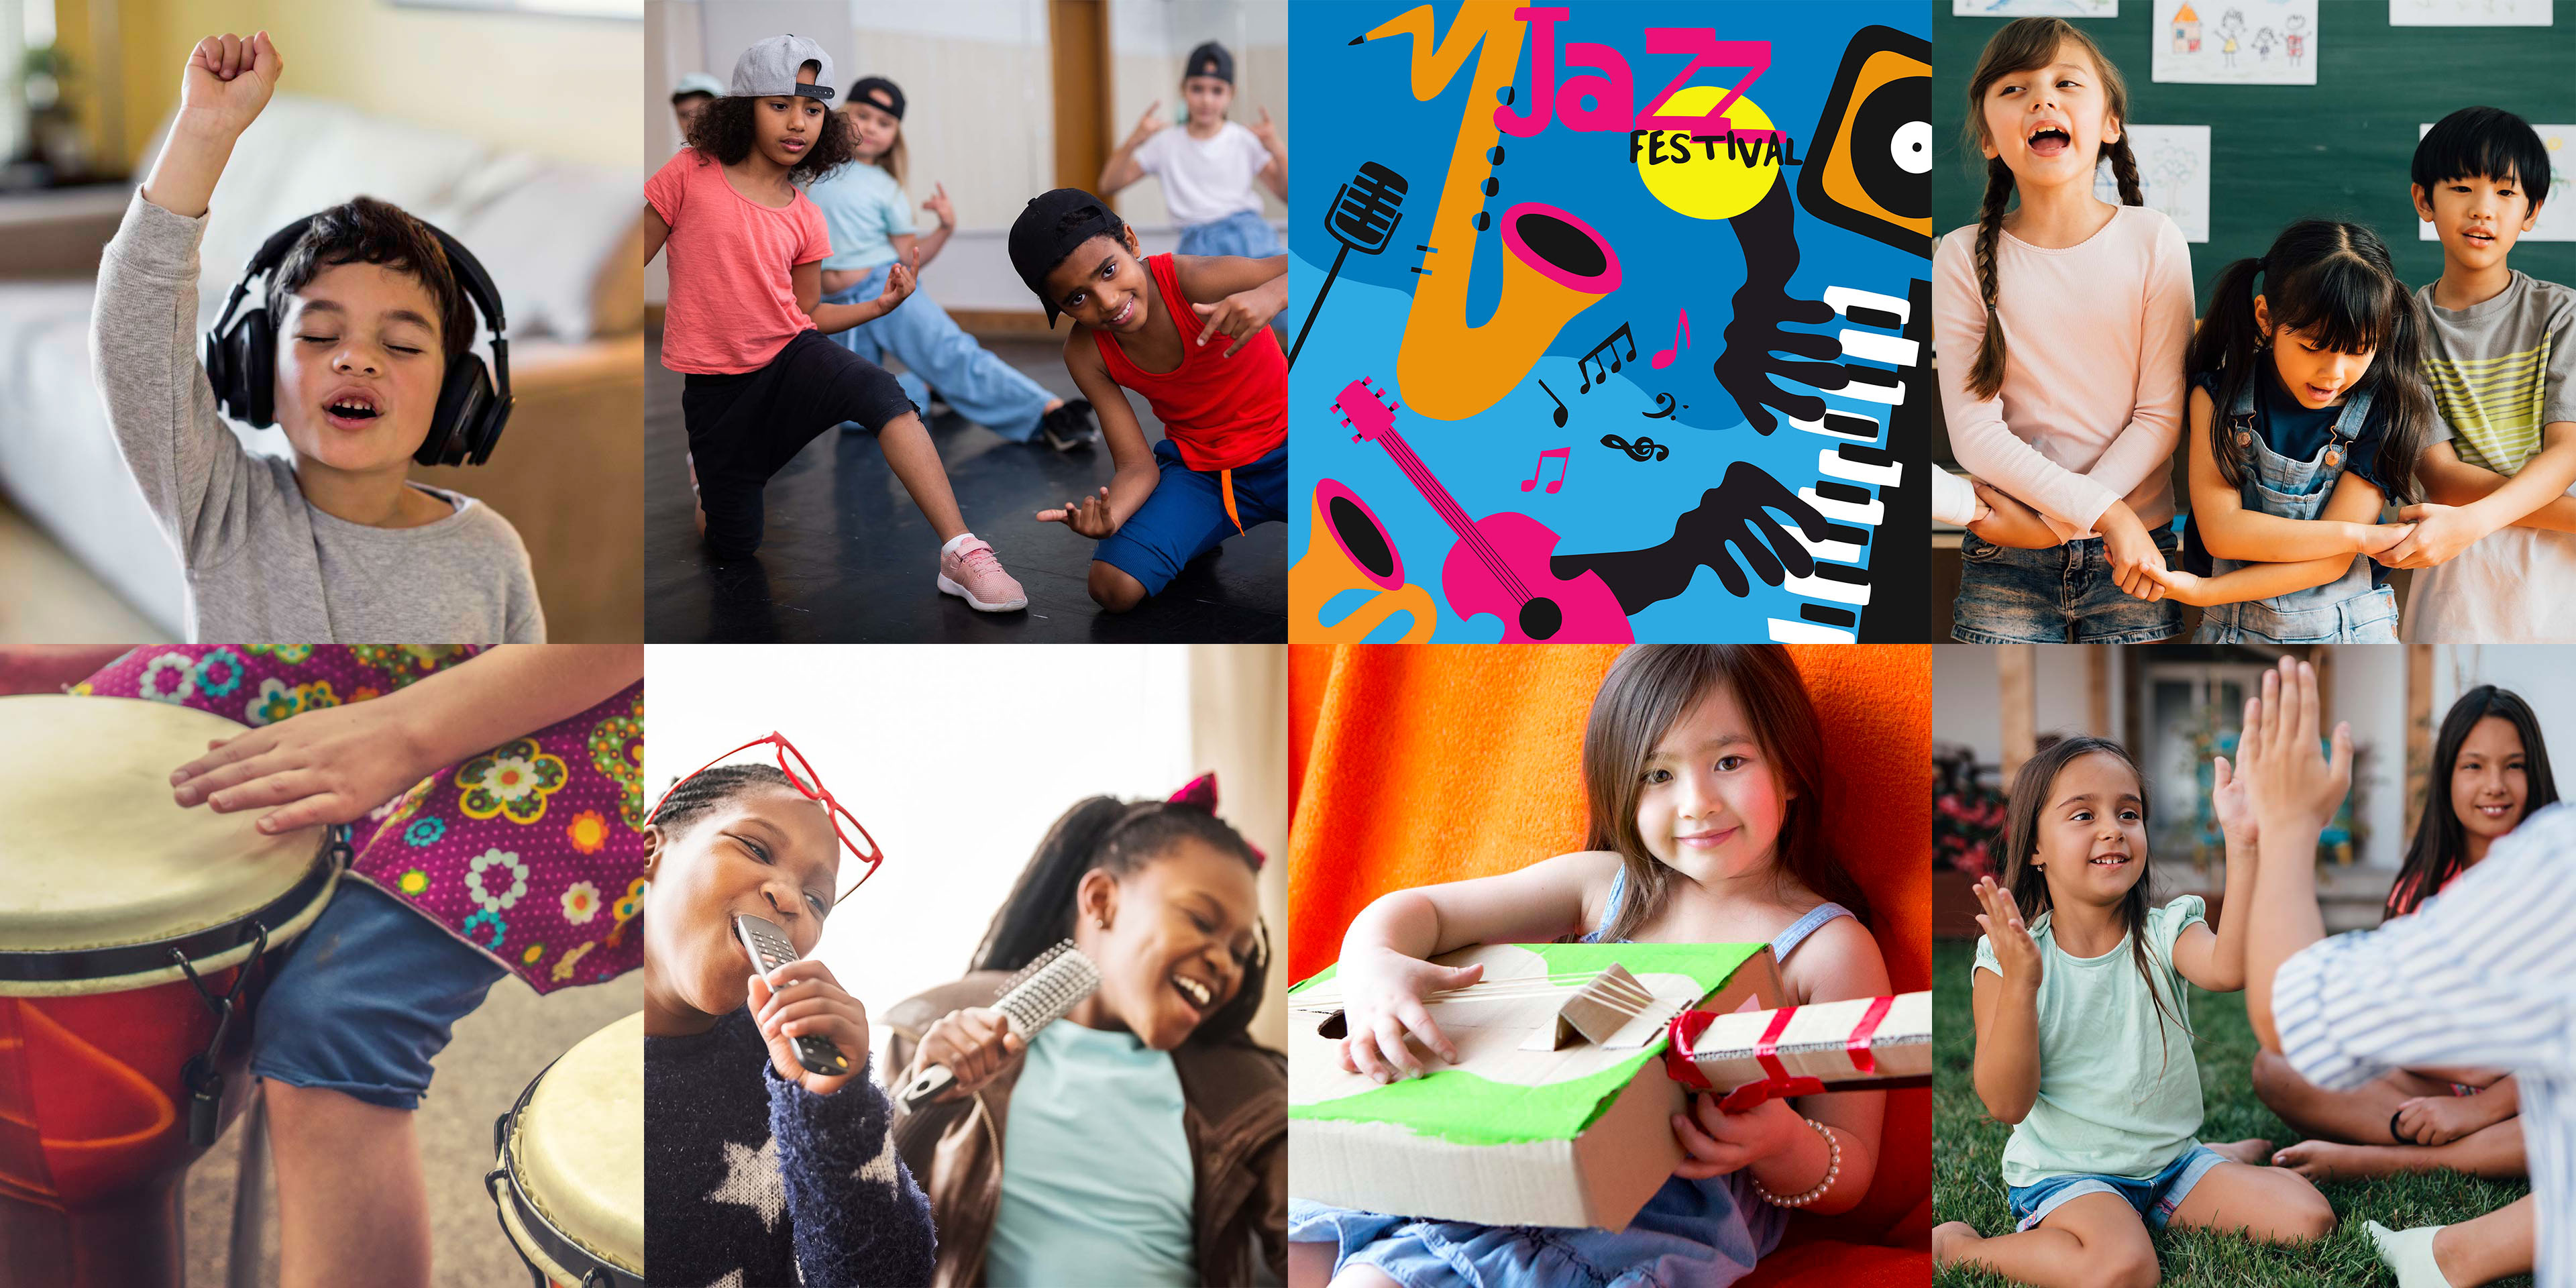 Mosaic of multicultural kids doing music-related activities